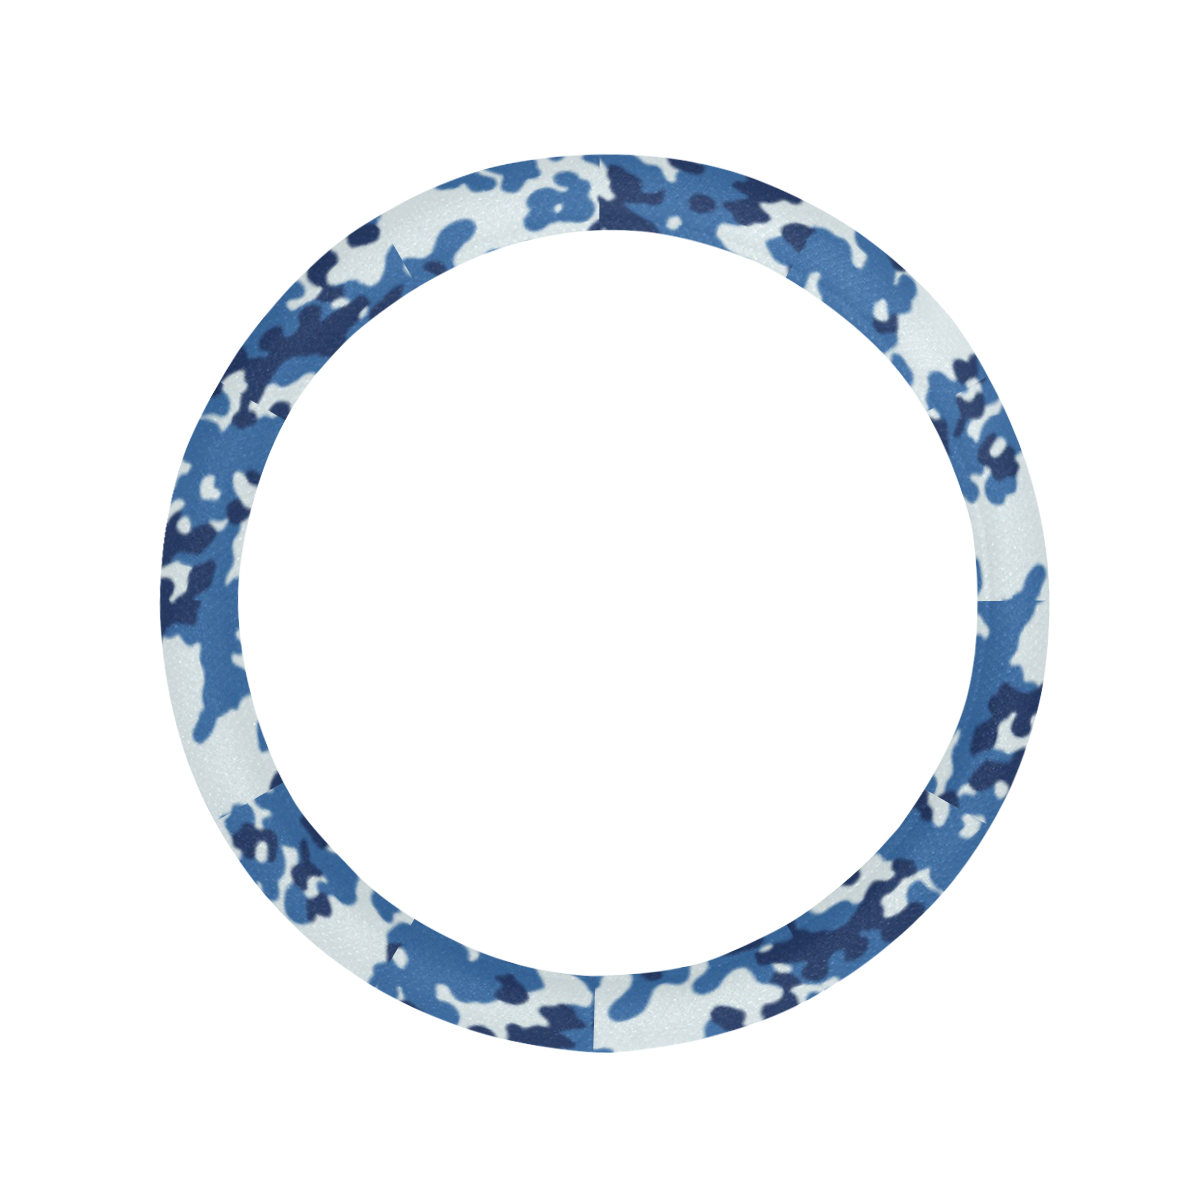 Digital Blue Camouflage Steering Wheel Cover with Anti-Slip Insert